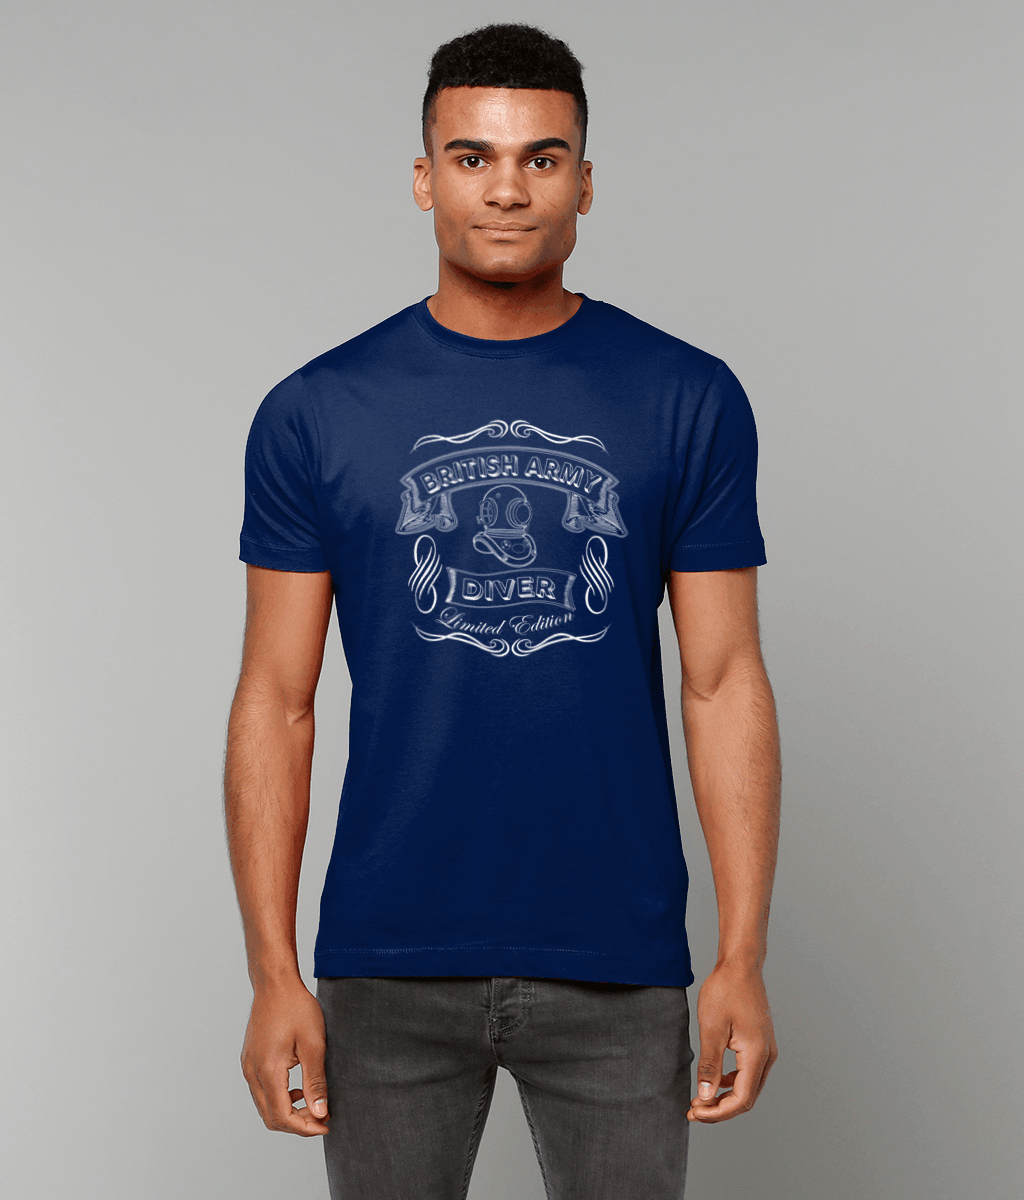 69 - British Army Diver - T-Shirt (Printed on Front) - Divers Gifts